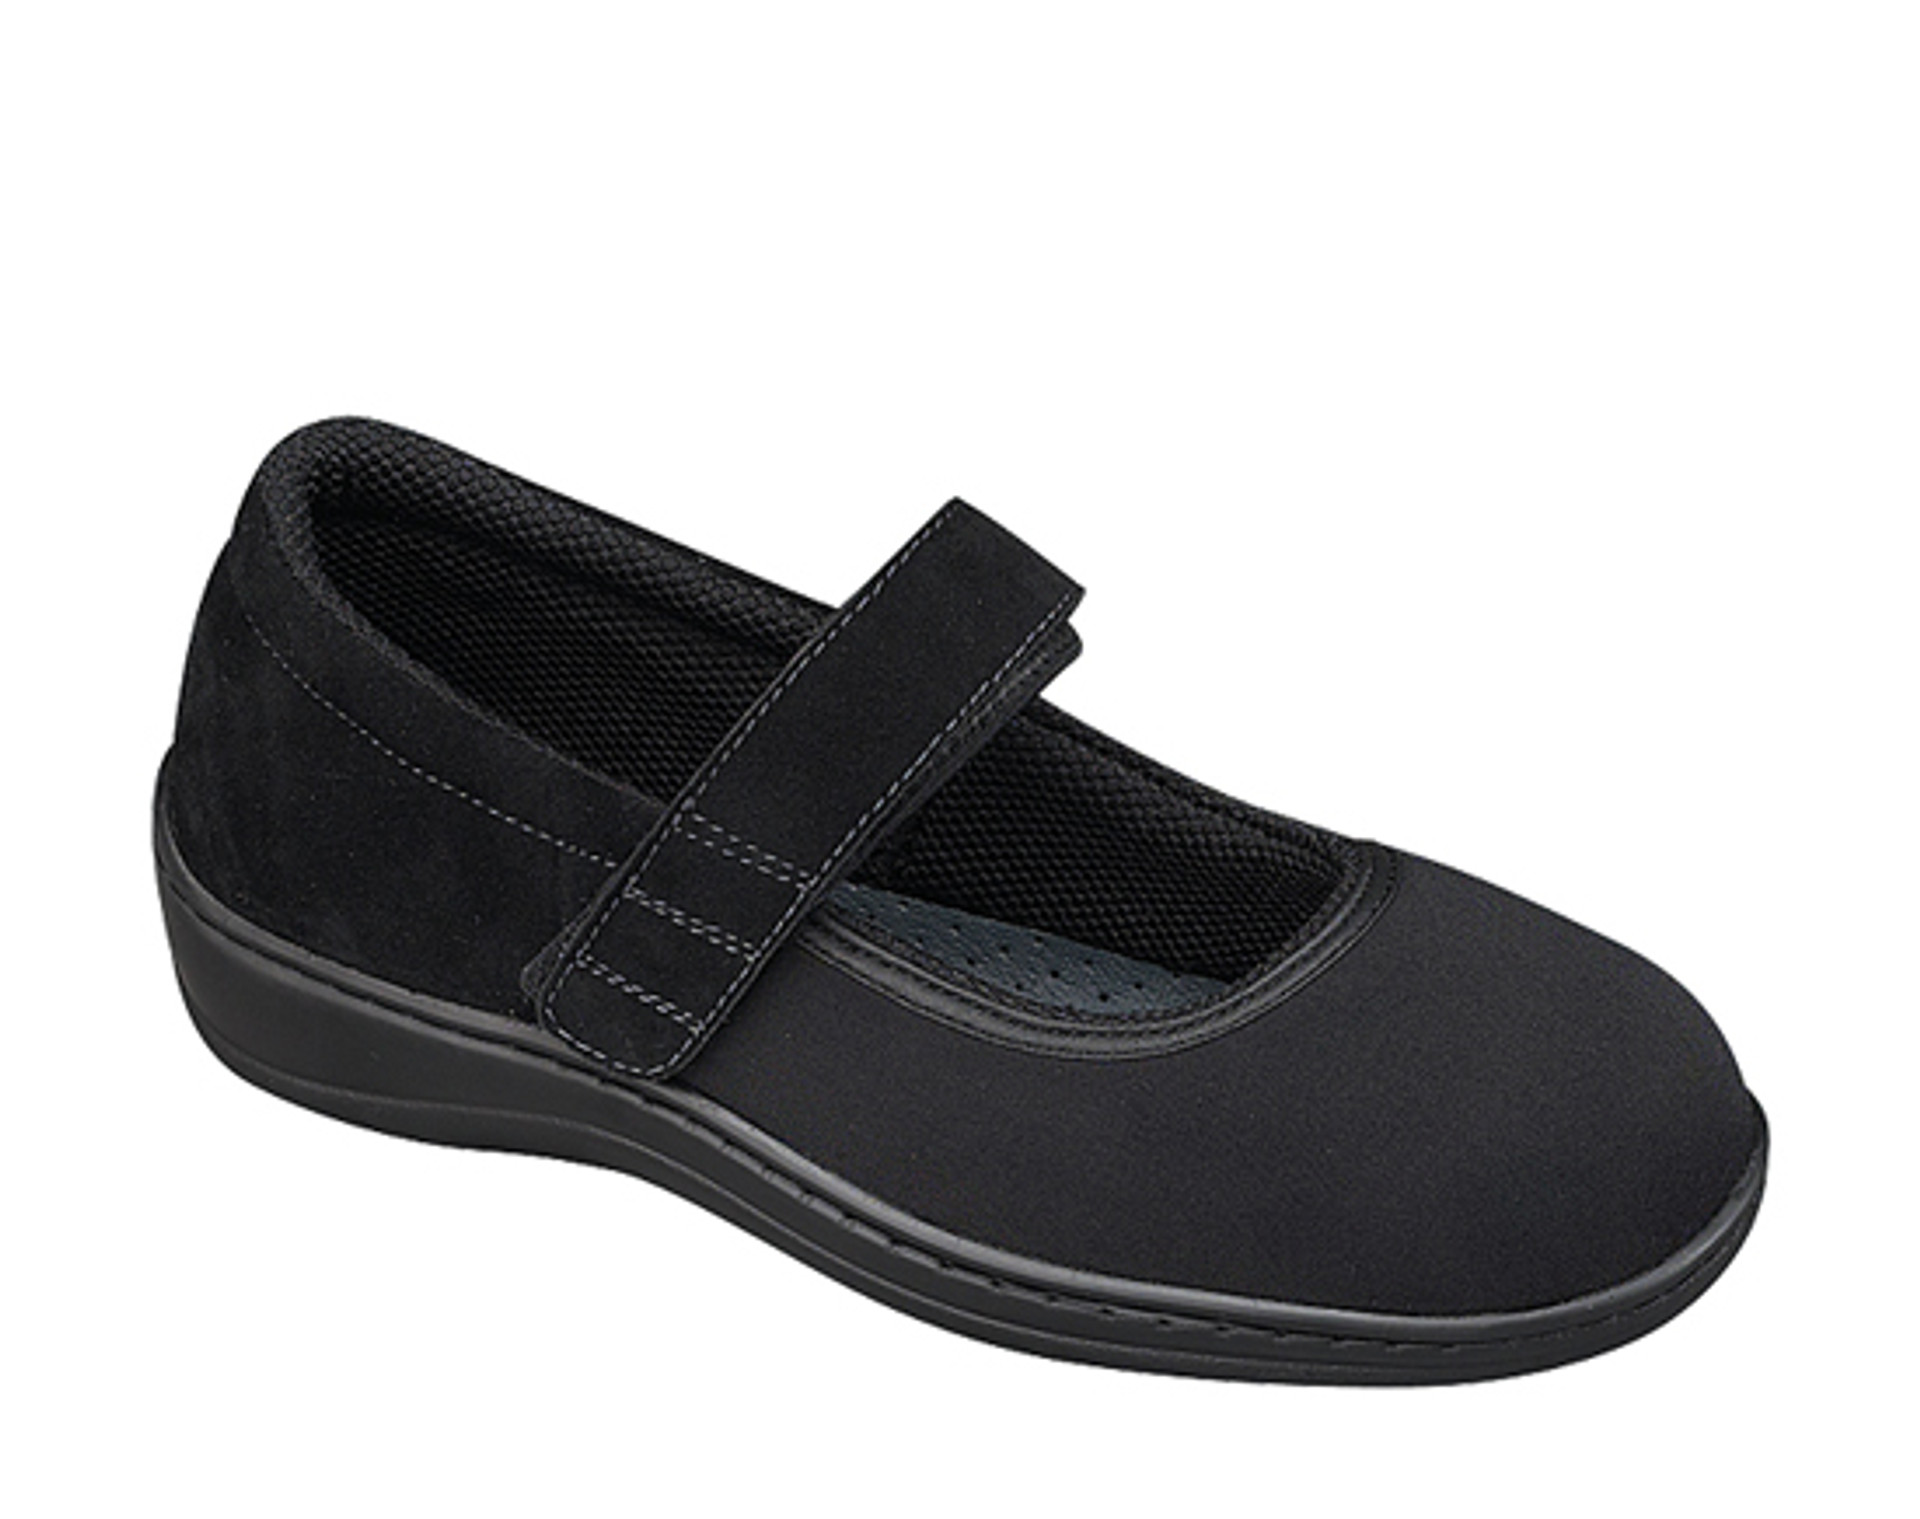 Orthofeet Women's Stretchable Mary Janes - Free Shipping